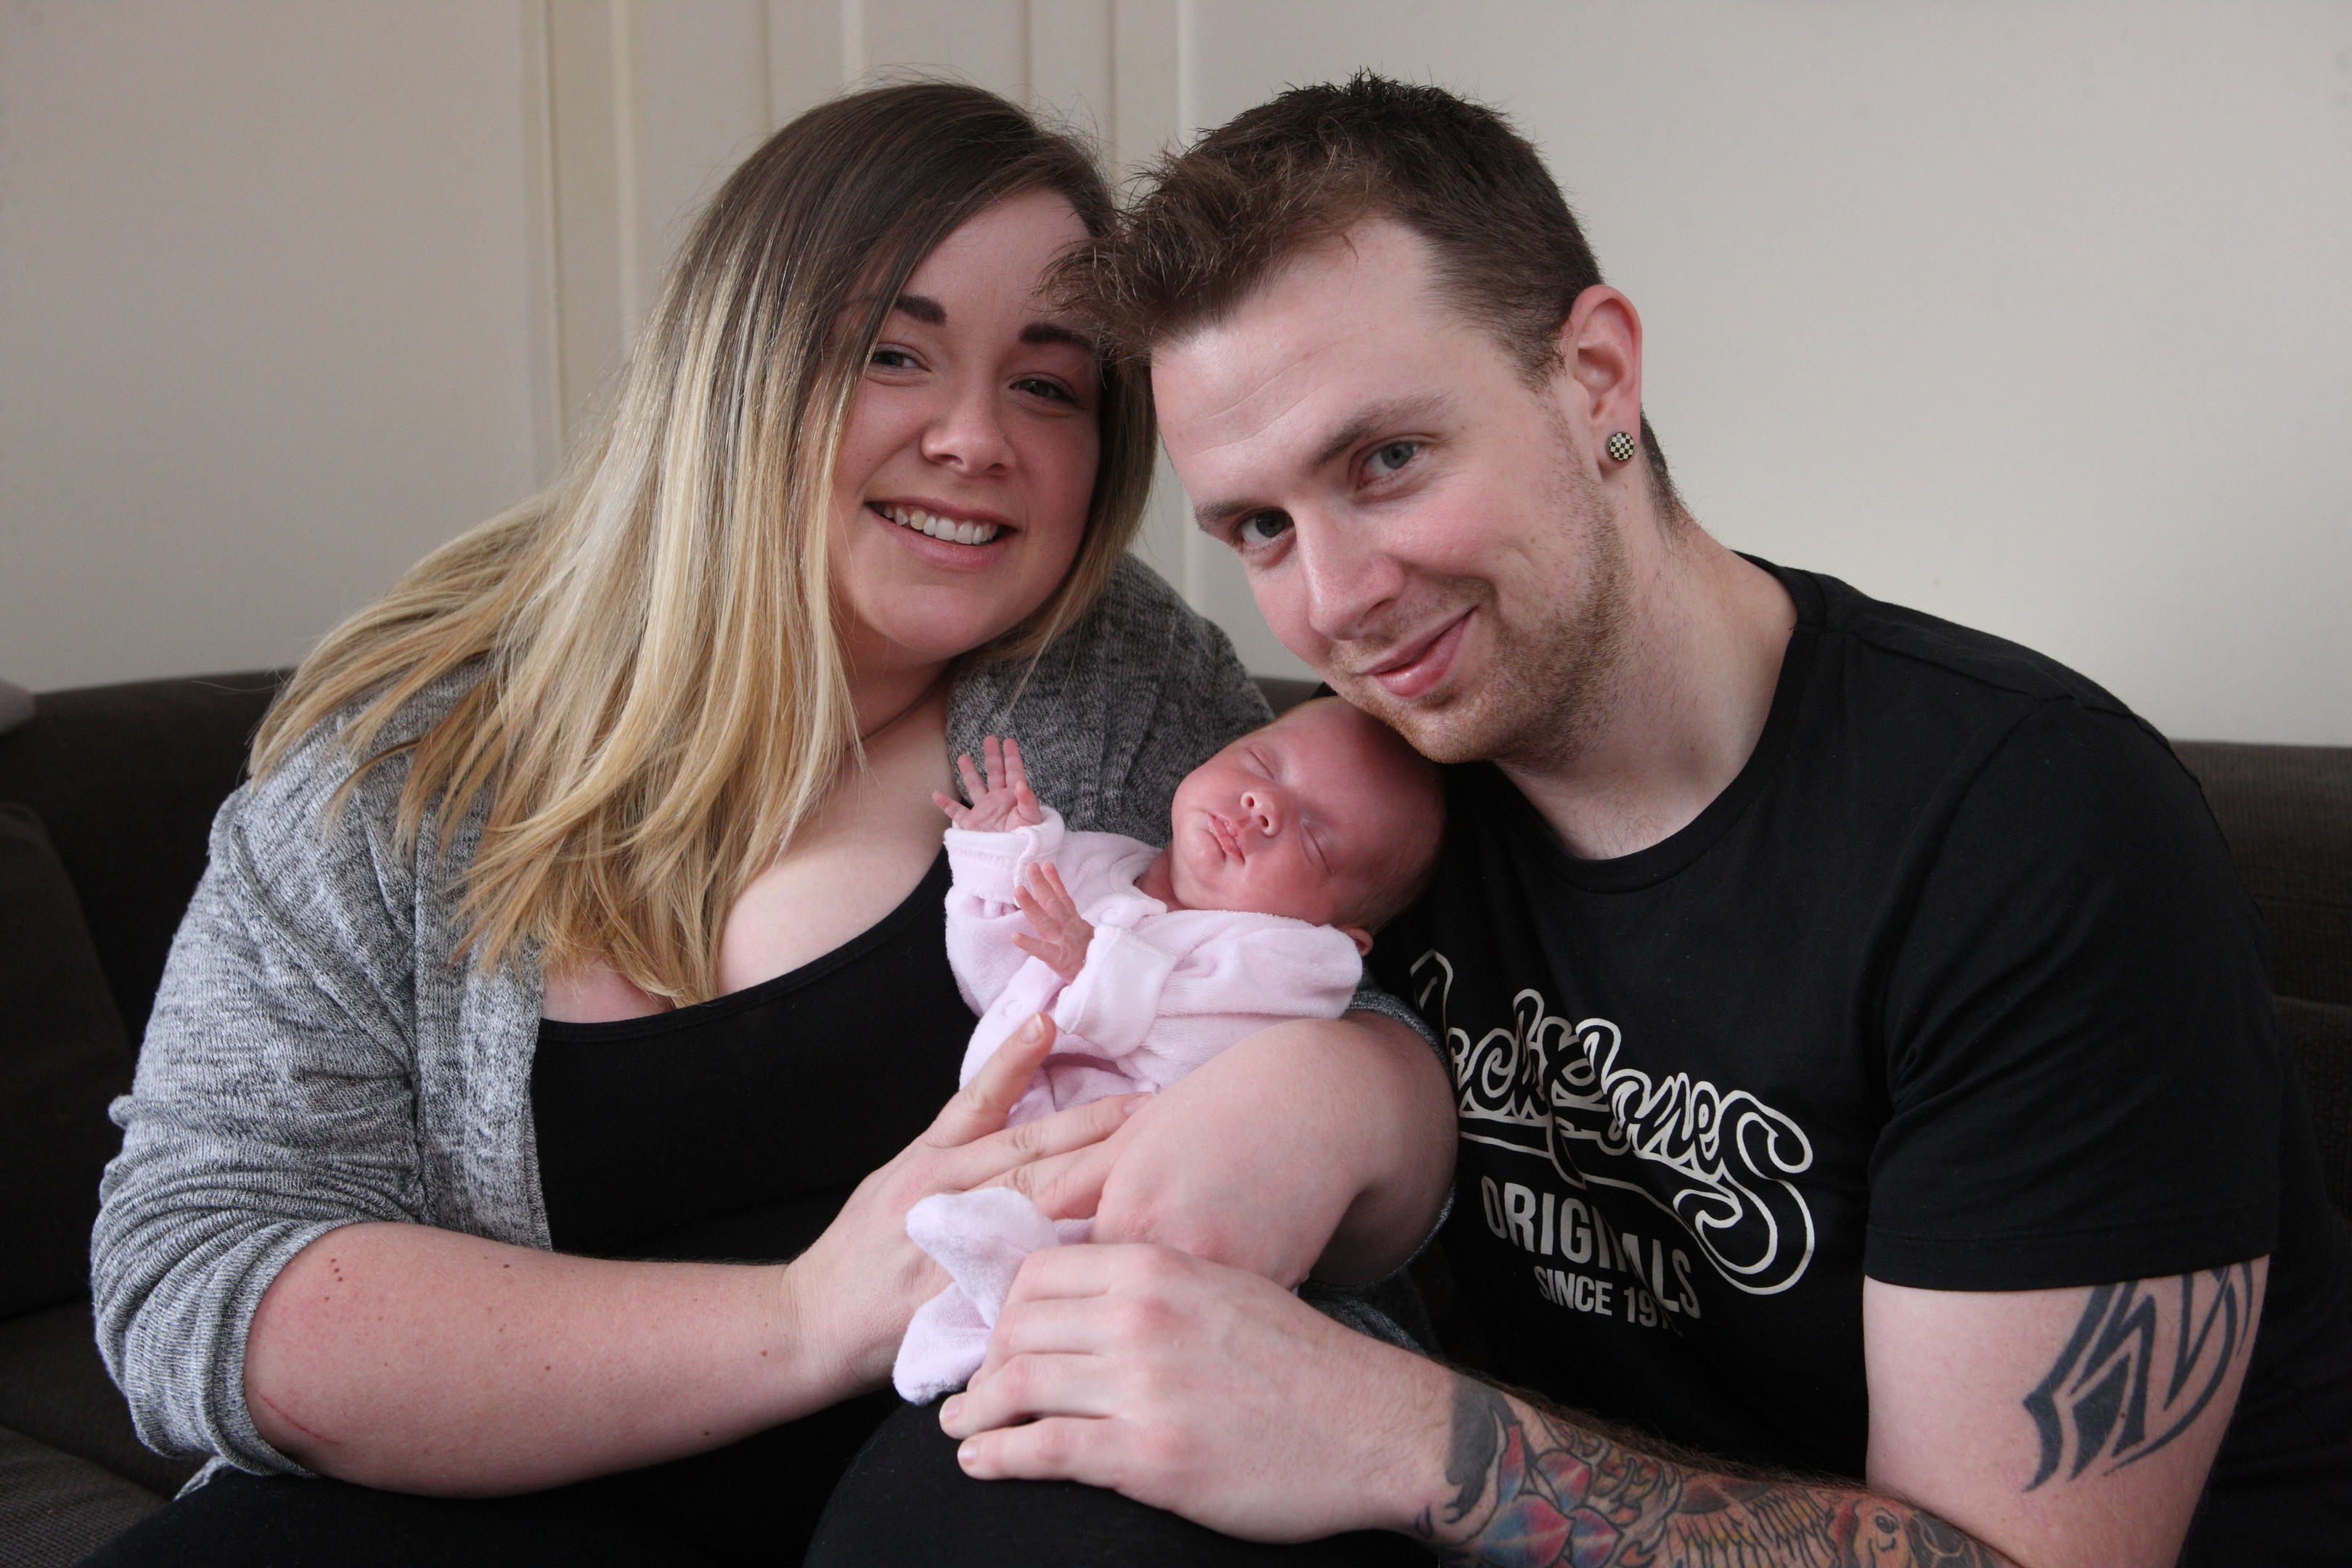 Ashleigh and Gordon want to say thank you to staff who saved their daughter's life.